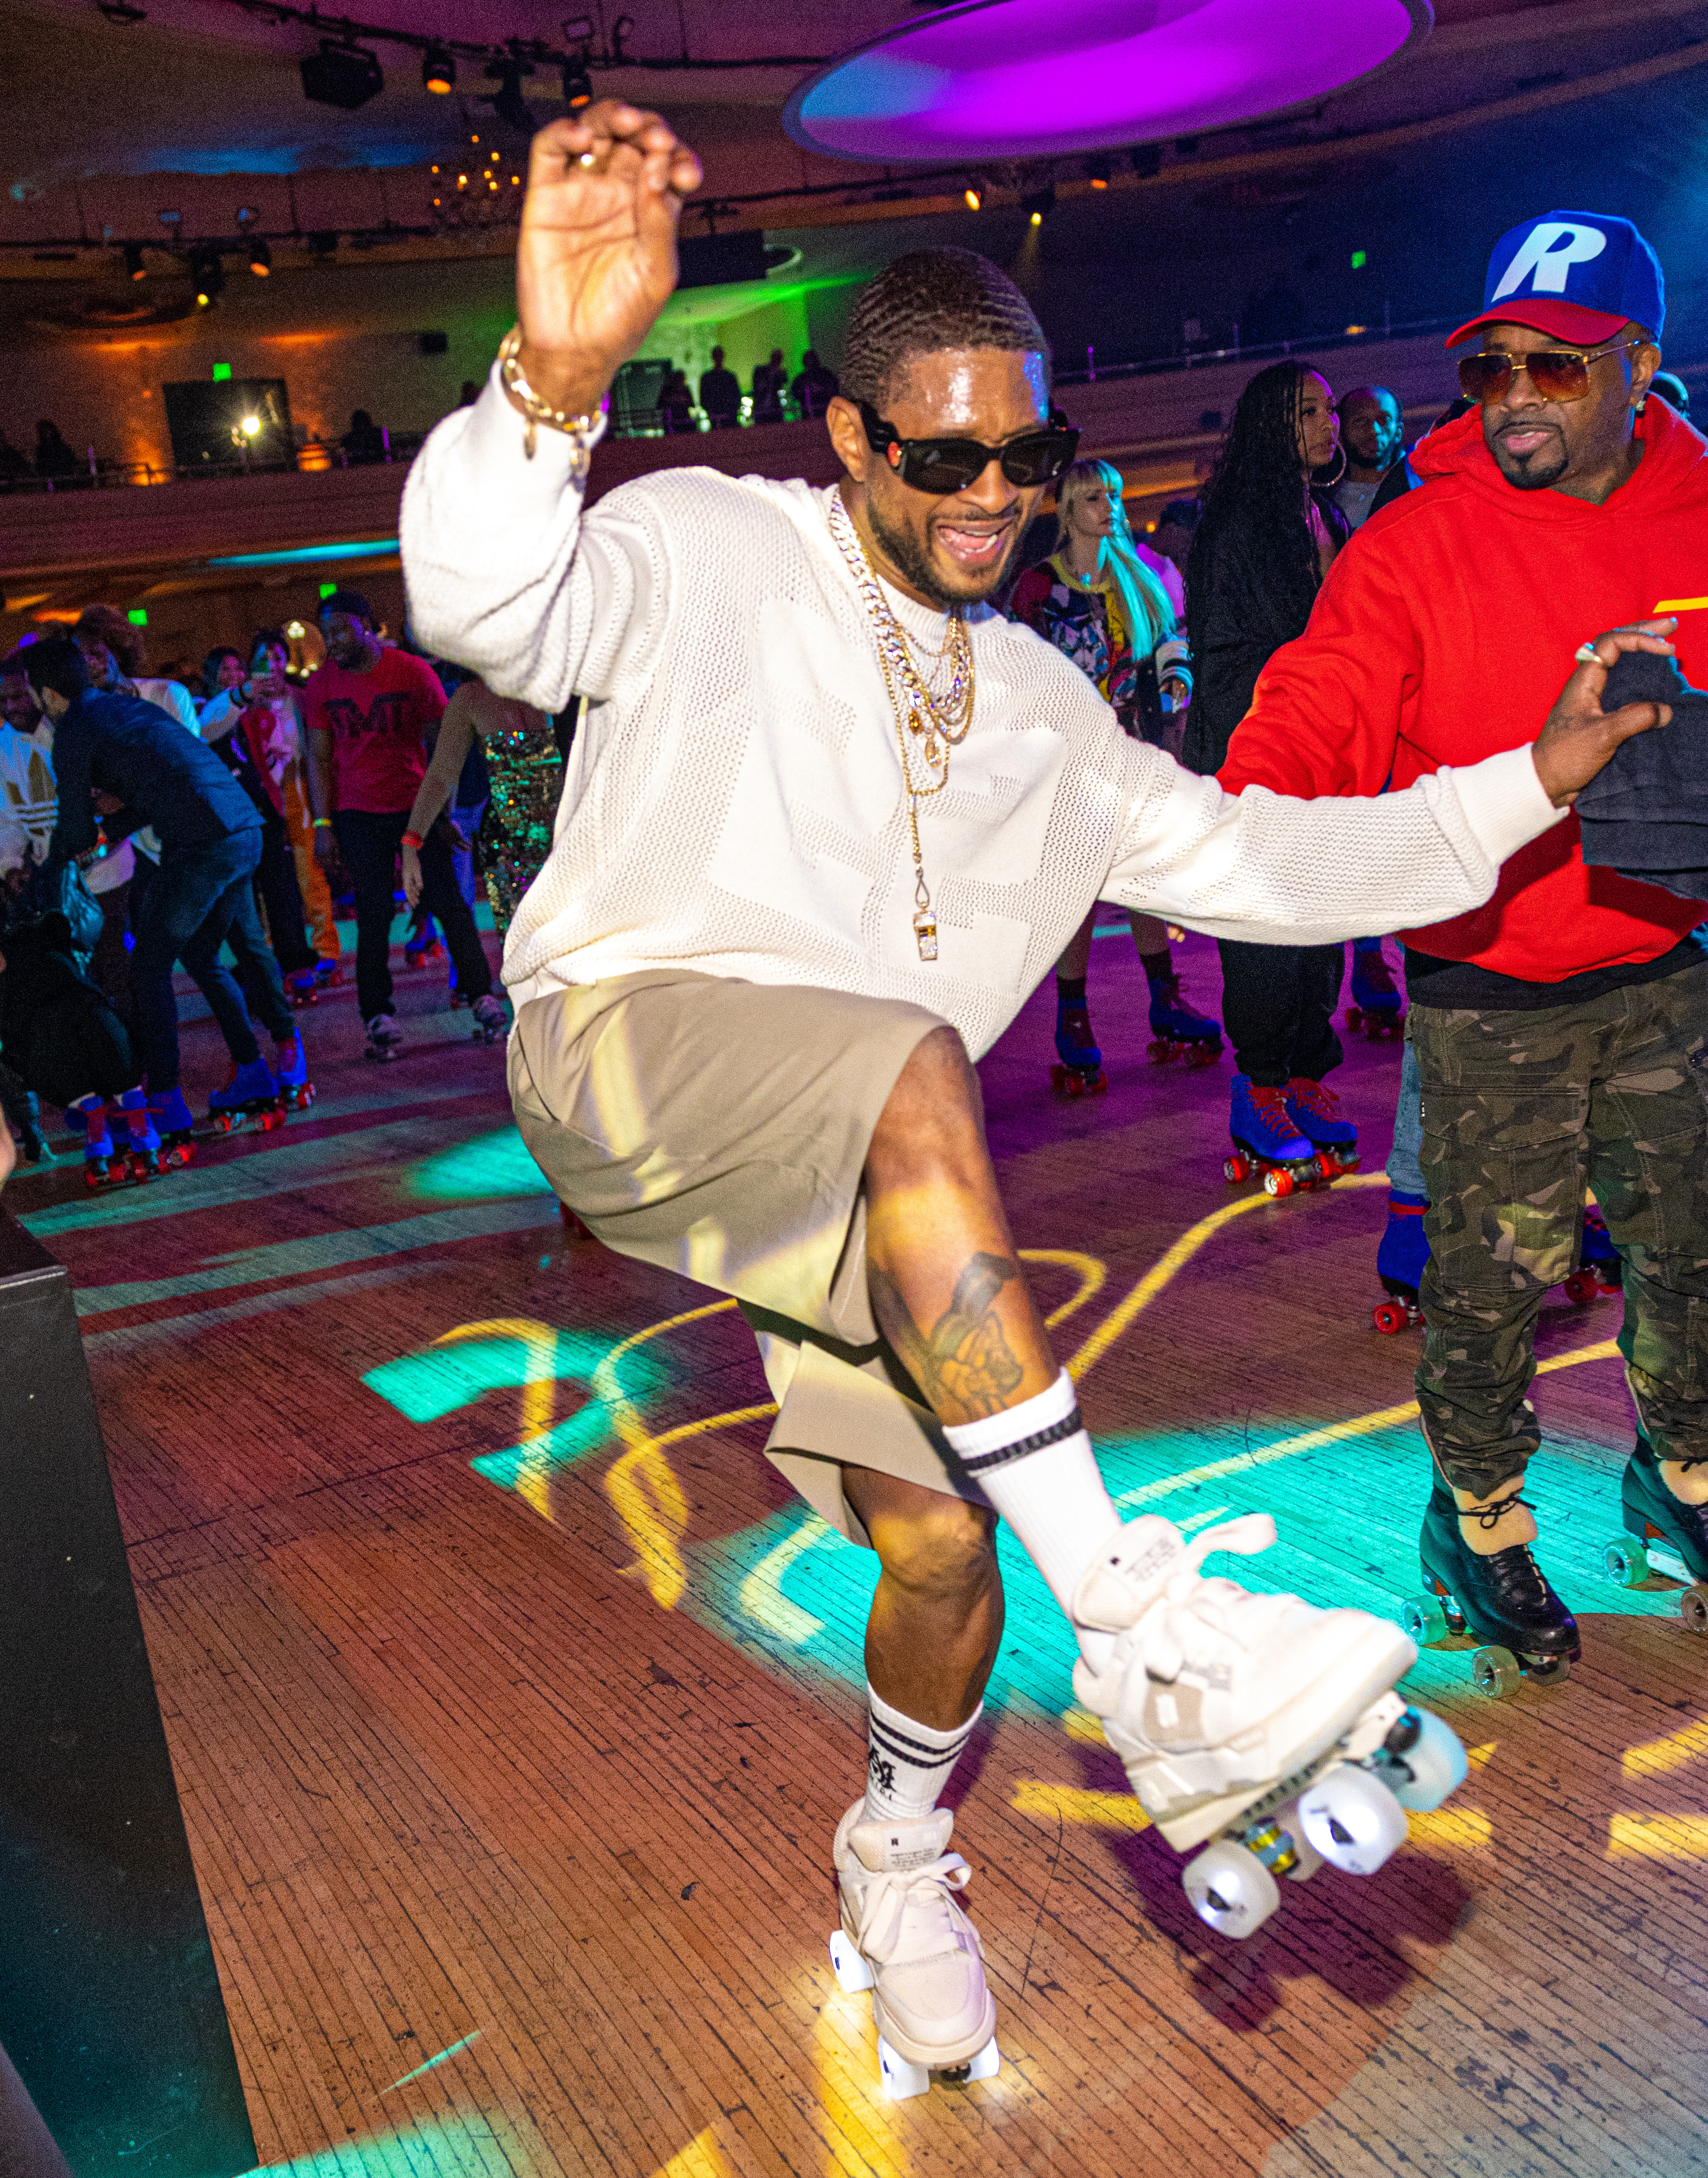 Usher skating at the Interscope Grammys party